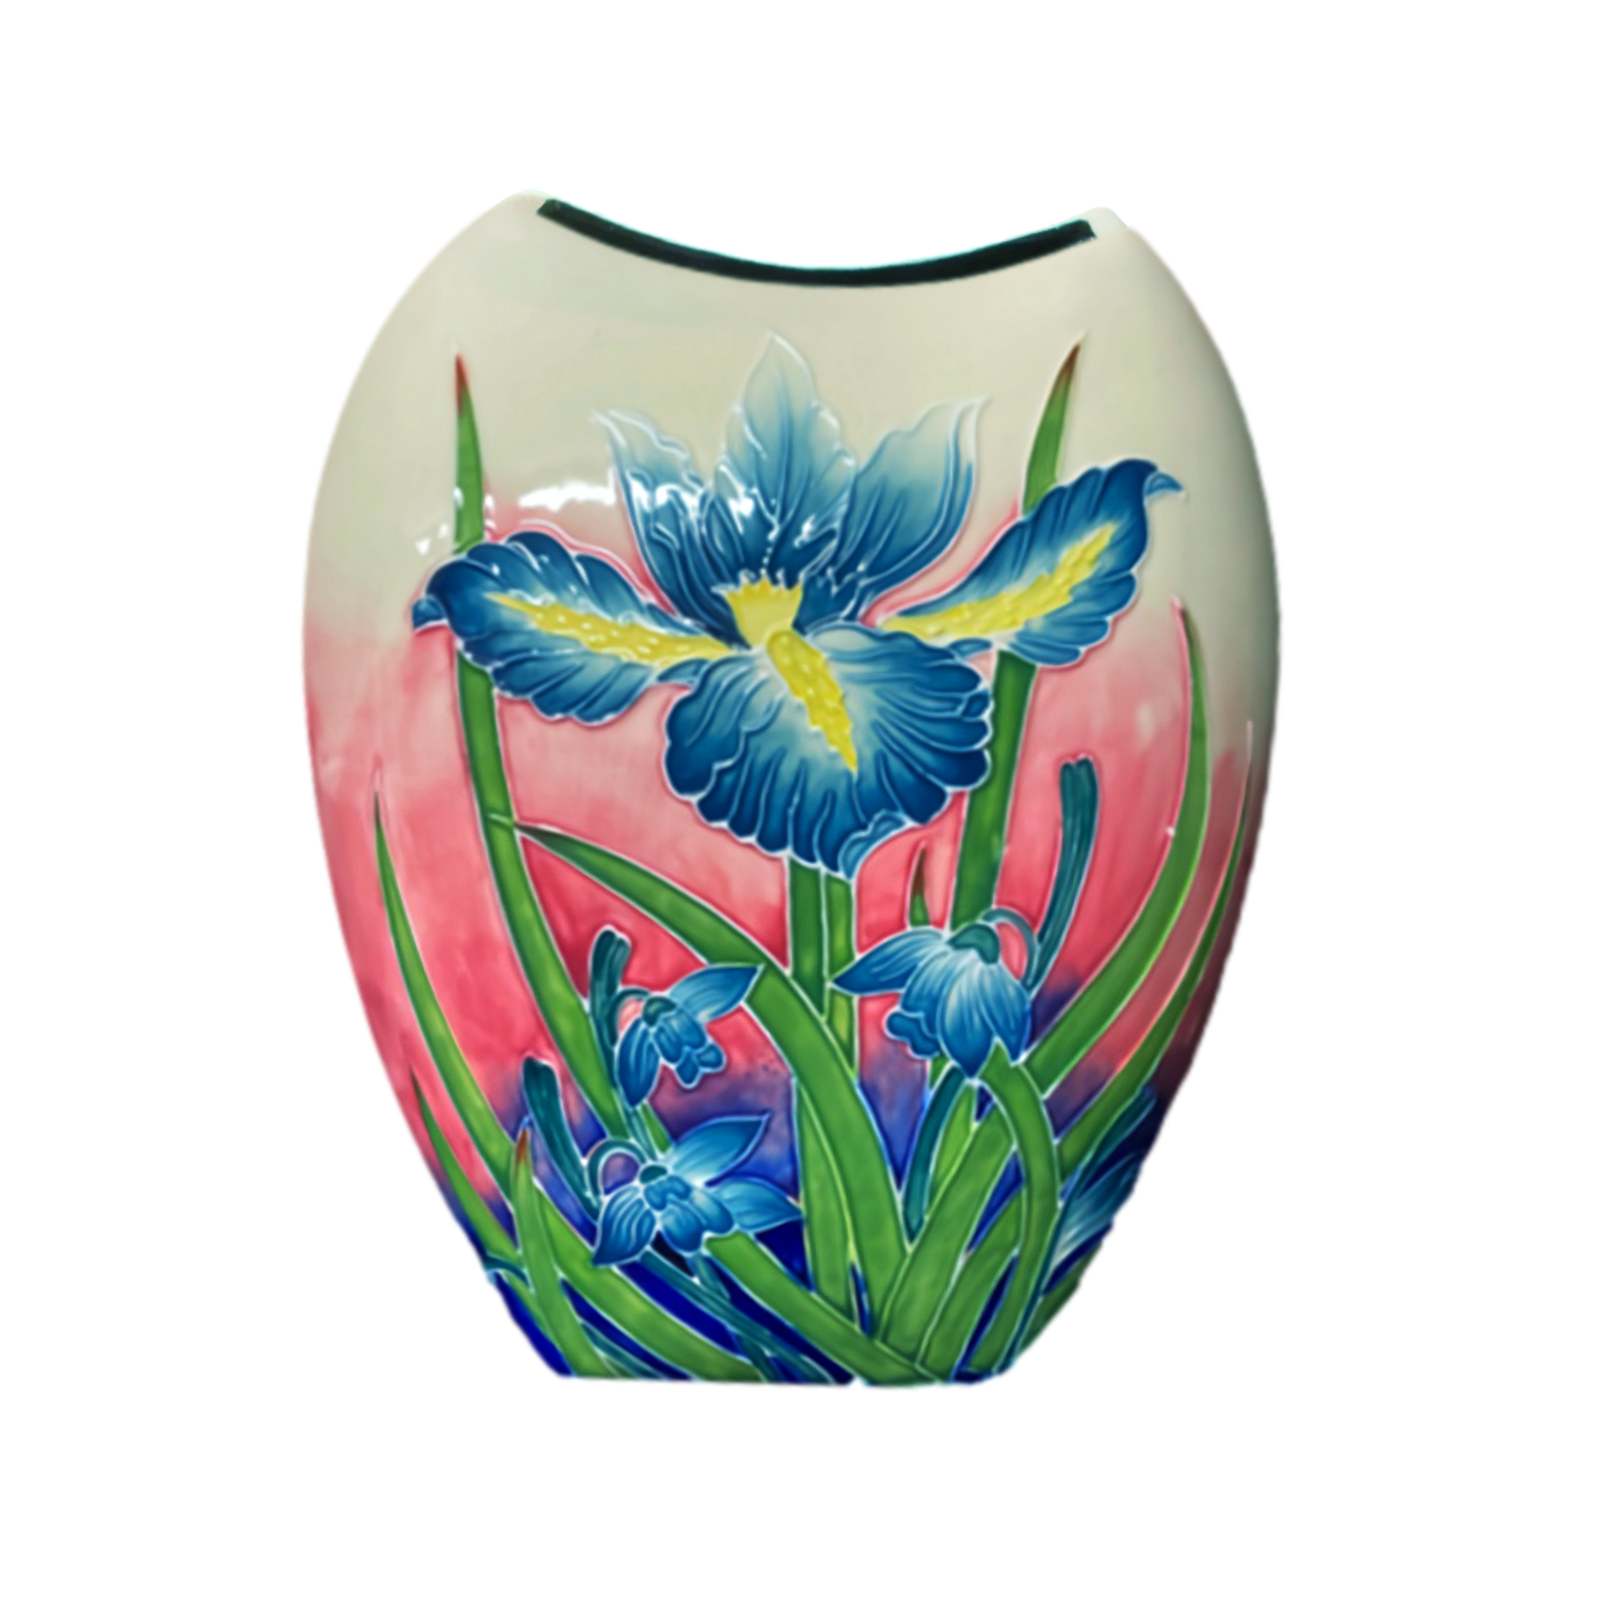 flat large vase made from ceramics by artisans, hand painted iris flower on both sides